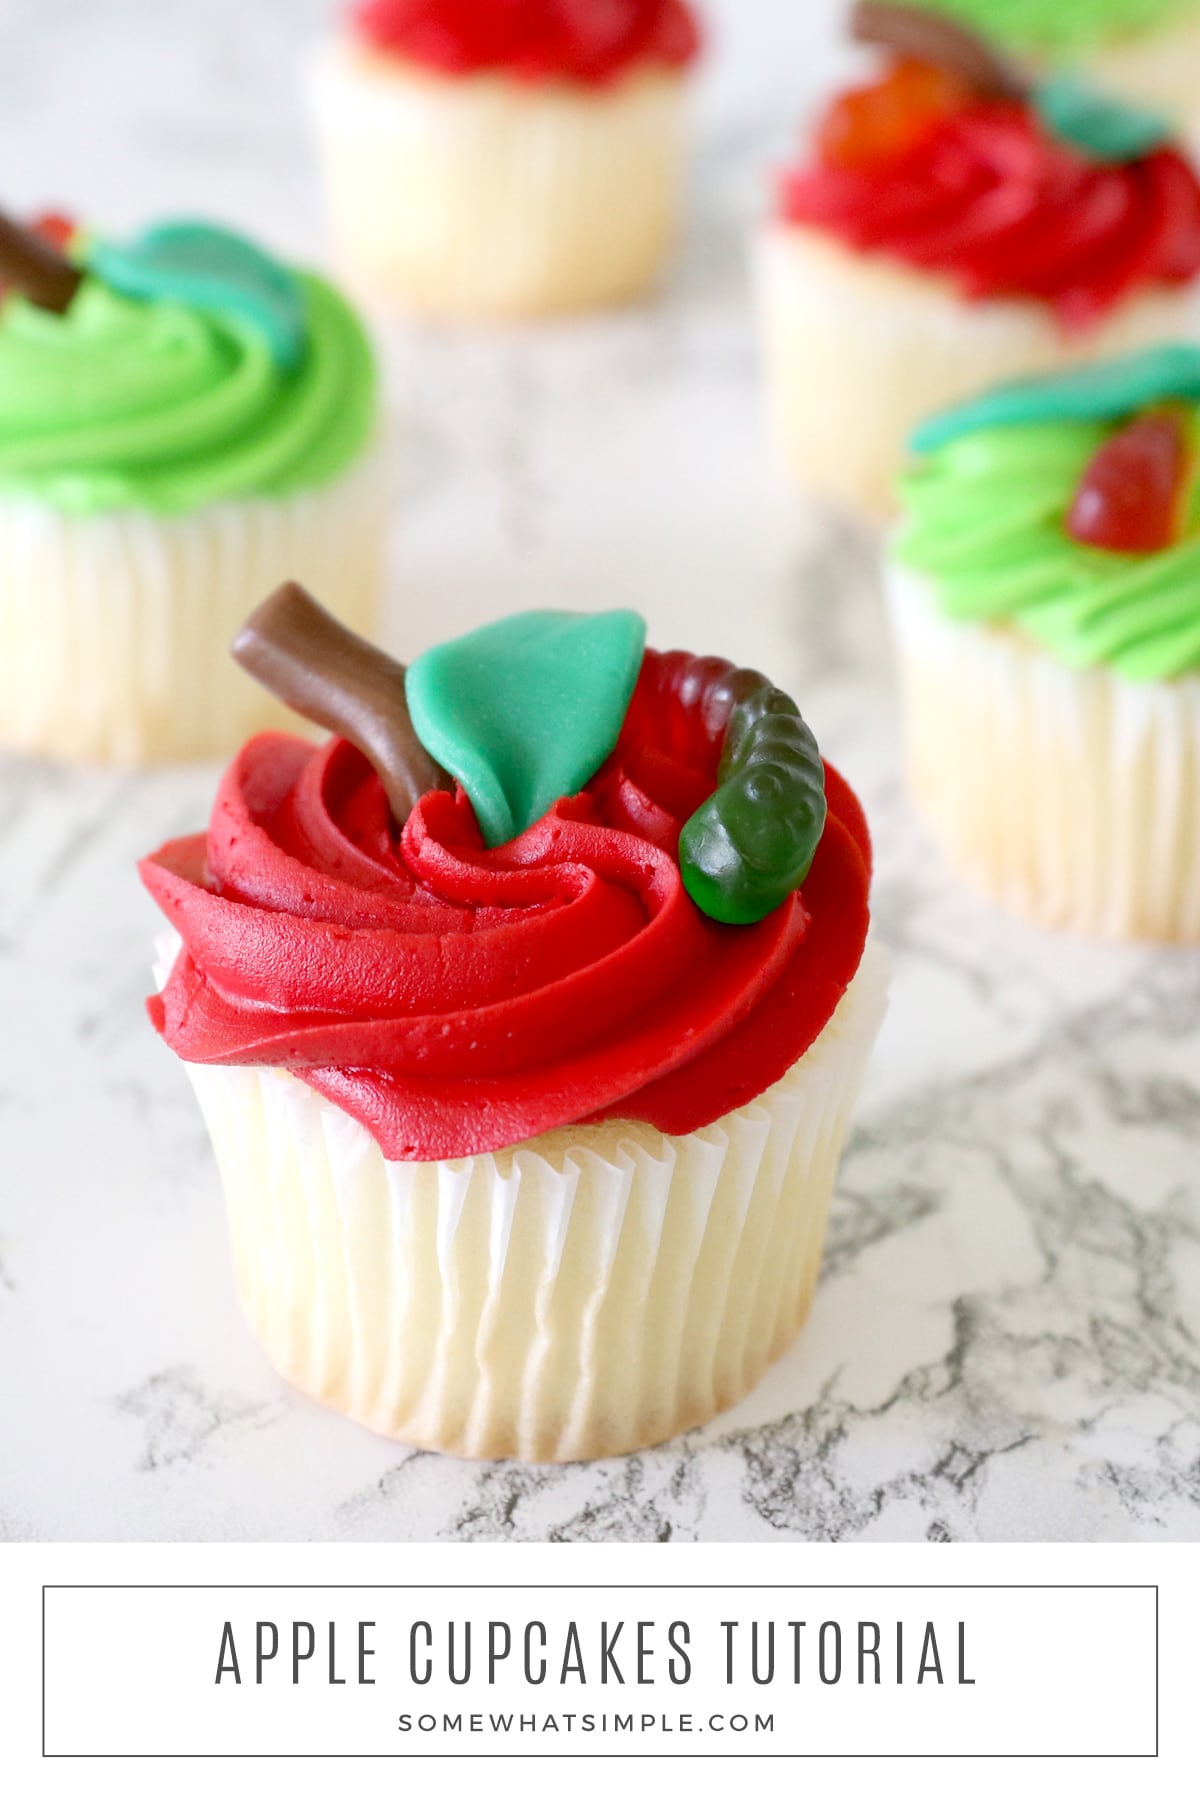 Apple Cupcakes are a fun way to celebrate the start of a new school year! They're easy to make and look adorable! via @somewhatsimple